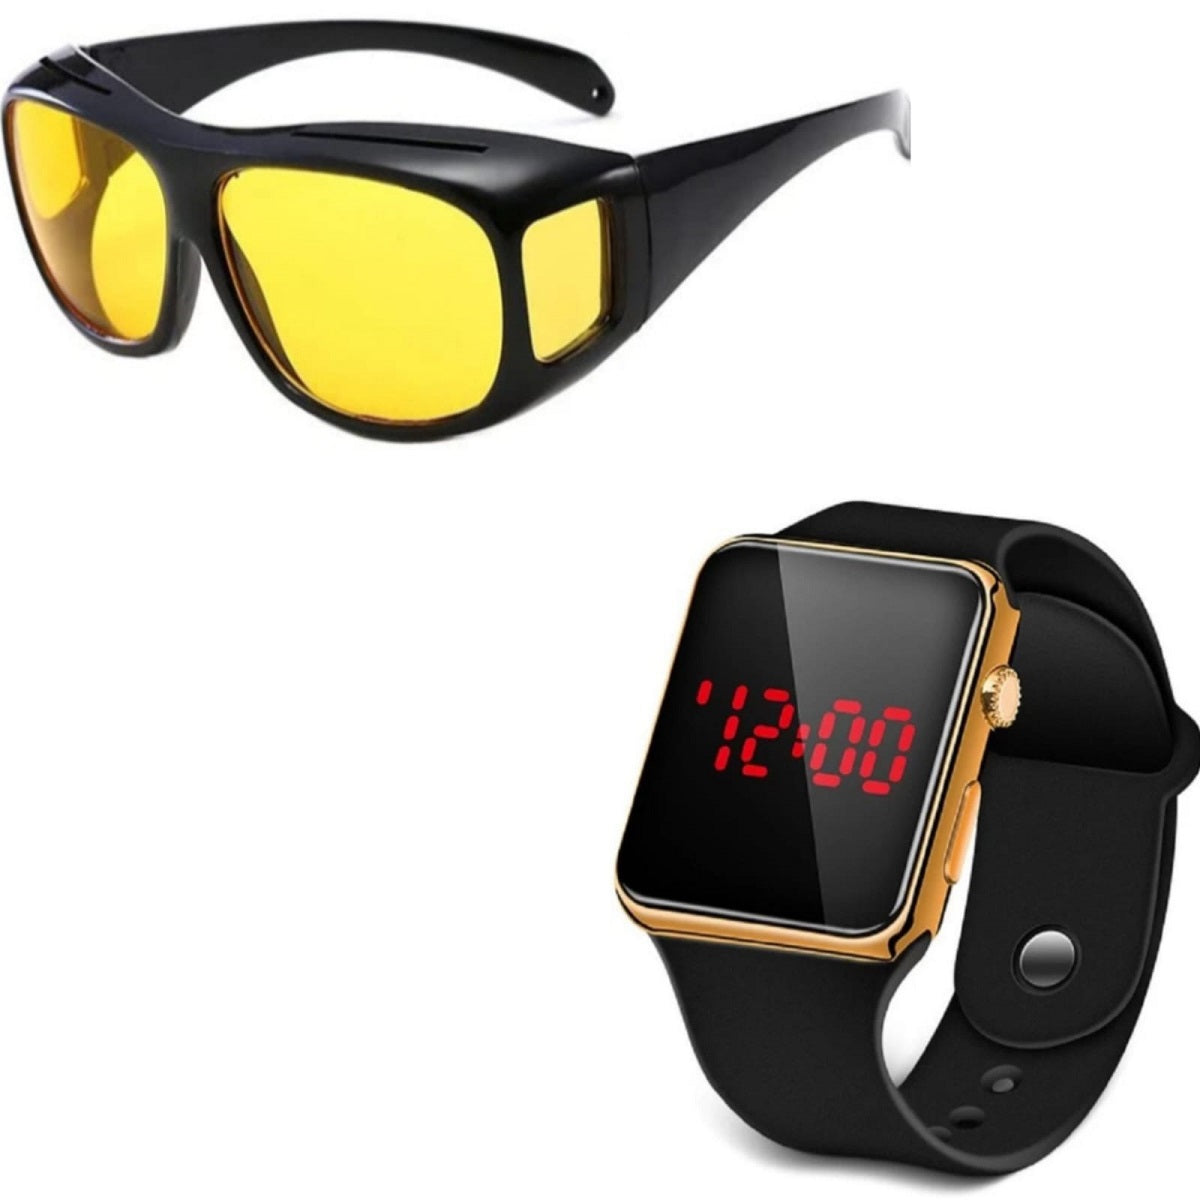 Day & Night HD Vision Wrap Around Goggles + Free Golden Digital Watch @ Rs.499/-